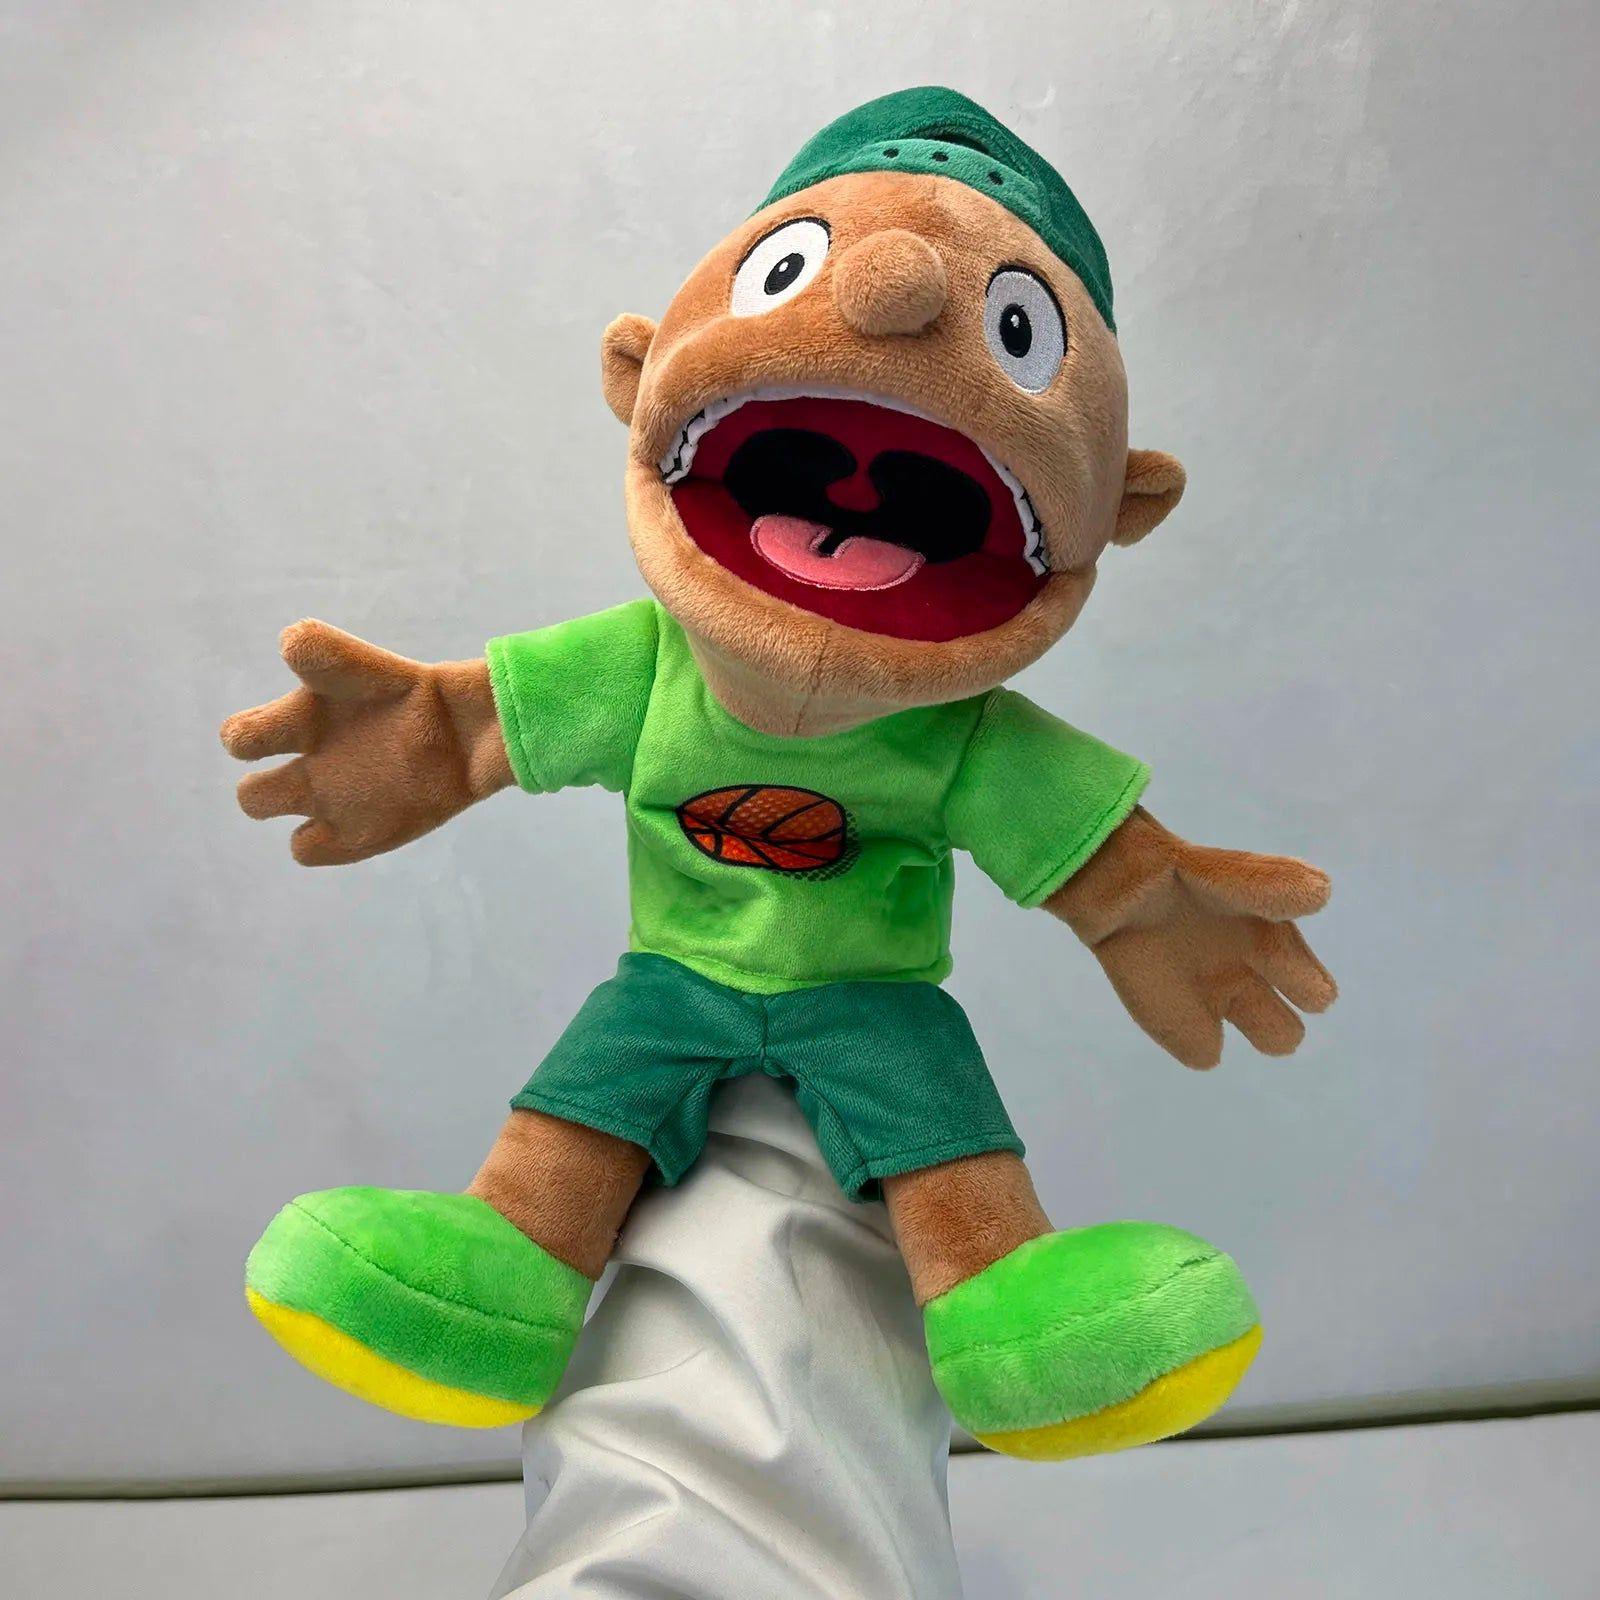 Jeffy Hand Puppet Feebee Rapper Zombie Plush Doll Toy Talk Show Muppet Parent-Child Activity Playhouse Gift for Kids